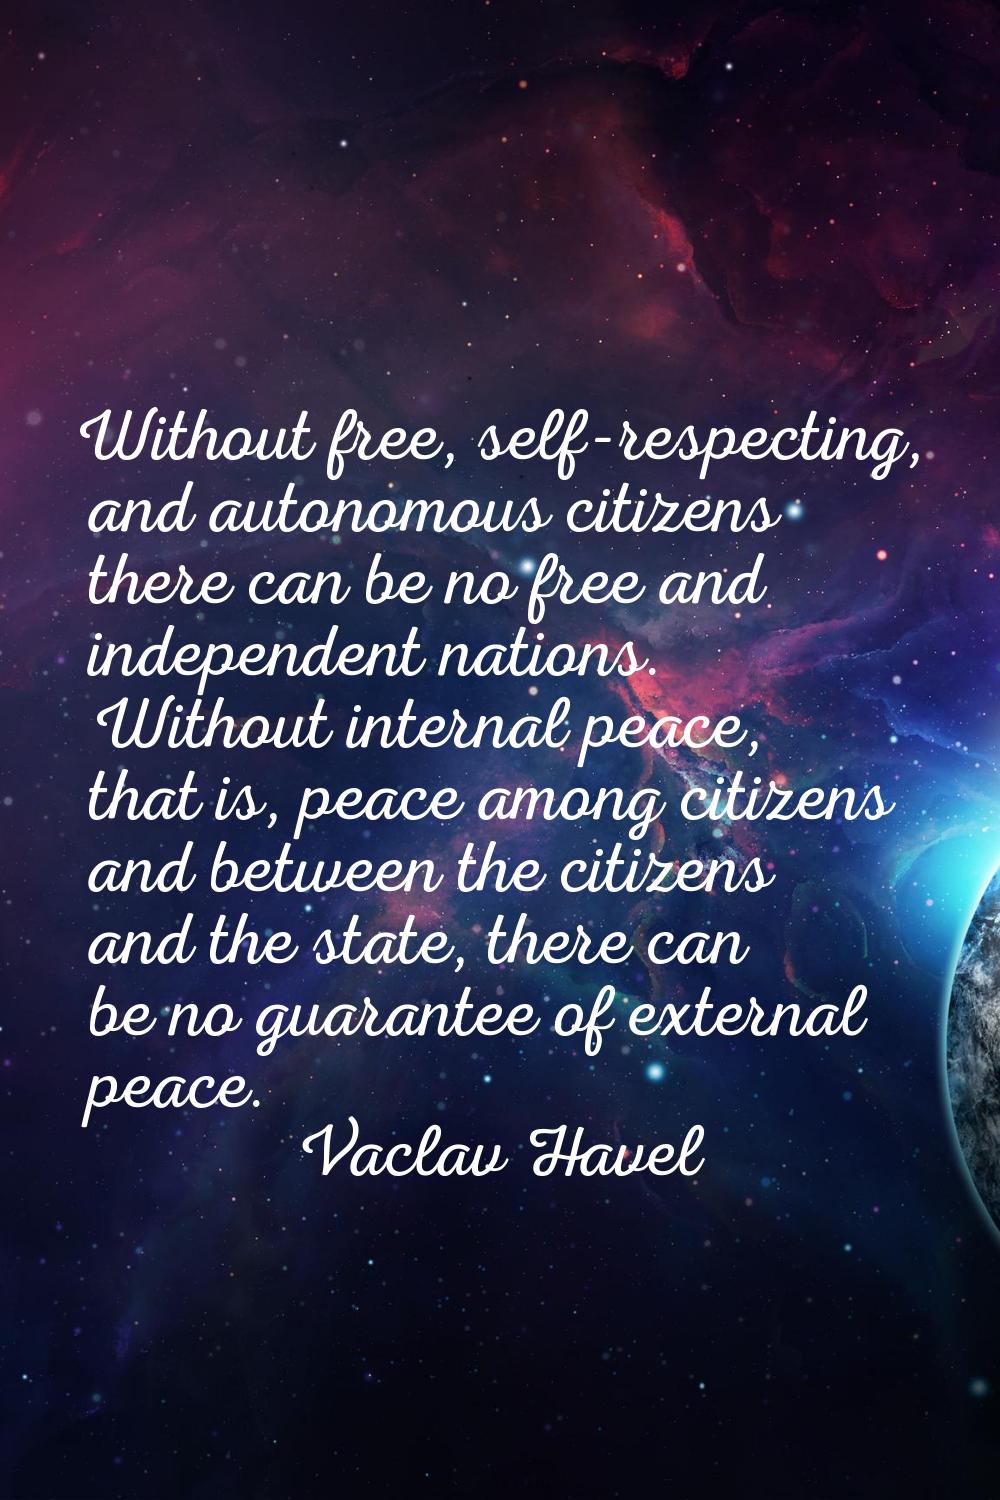 Without free, self-respecting, and autonomous citizens there can be no free and independent nations